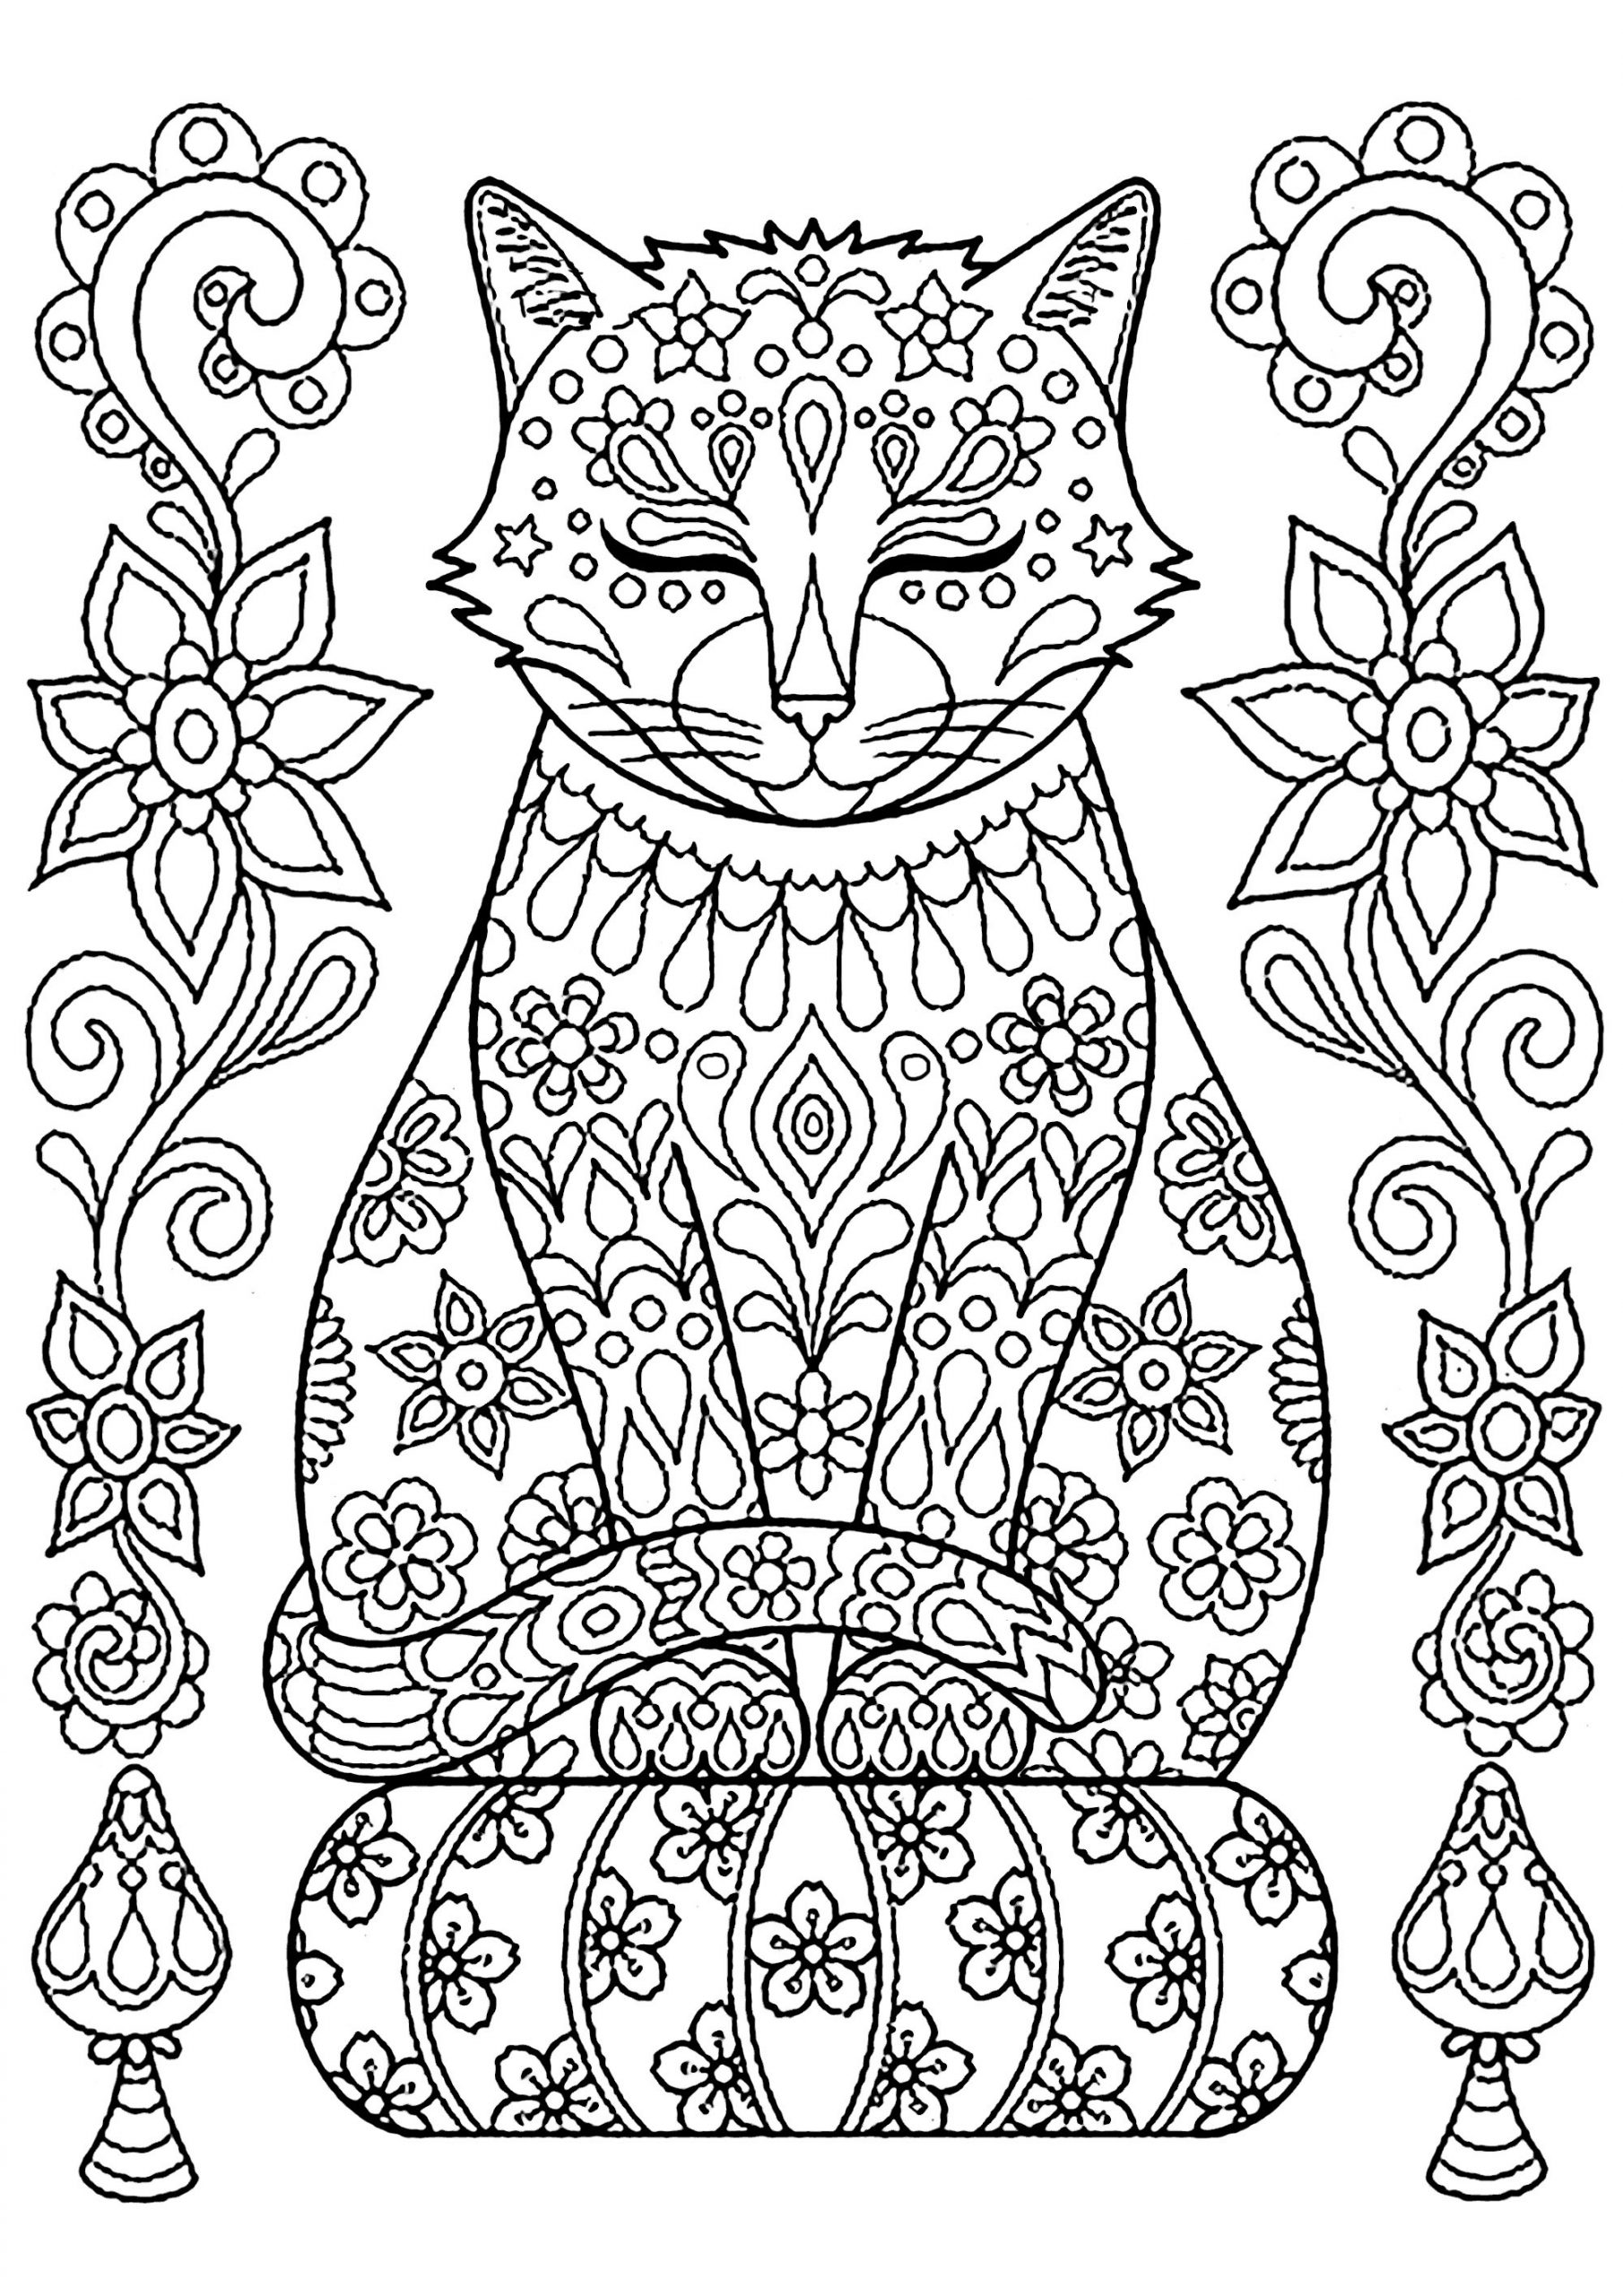 image=cats coloring cute cat on pillow with flowers 1